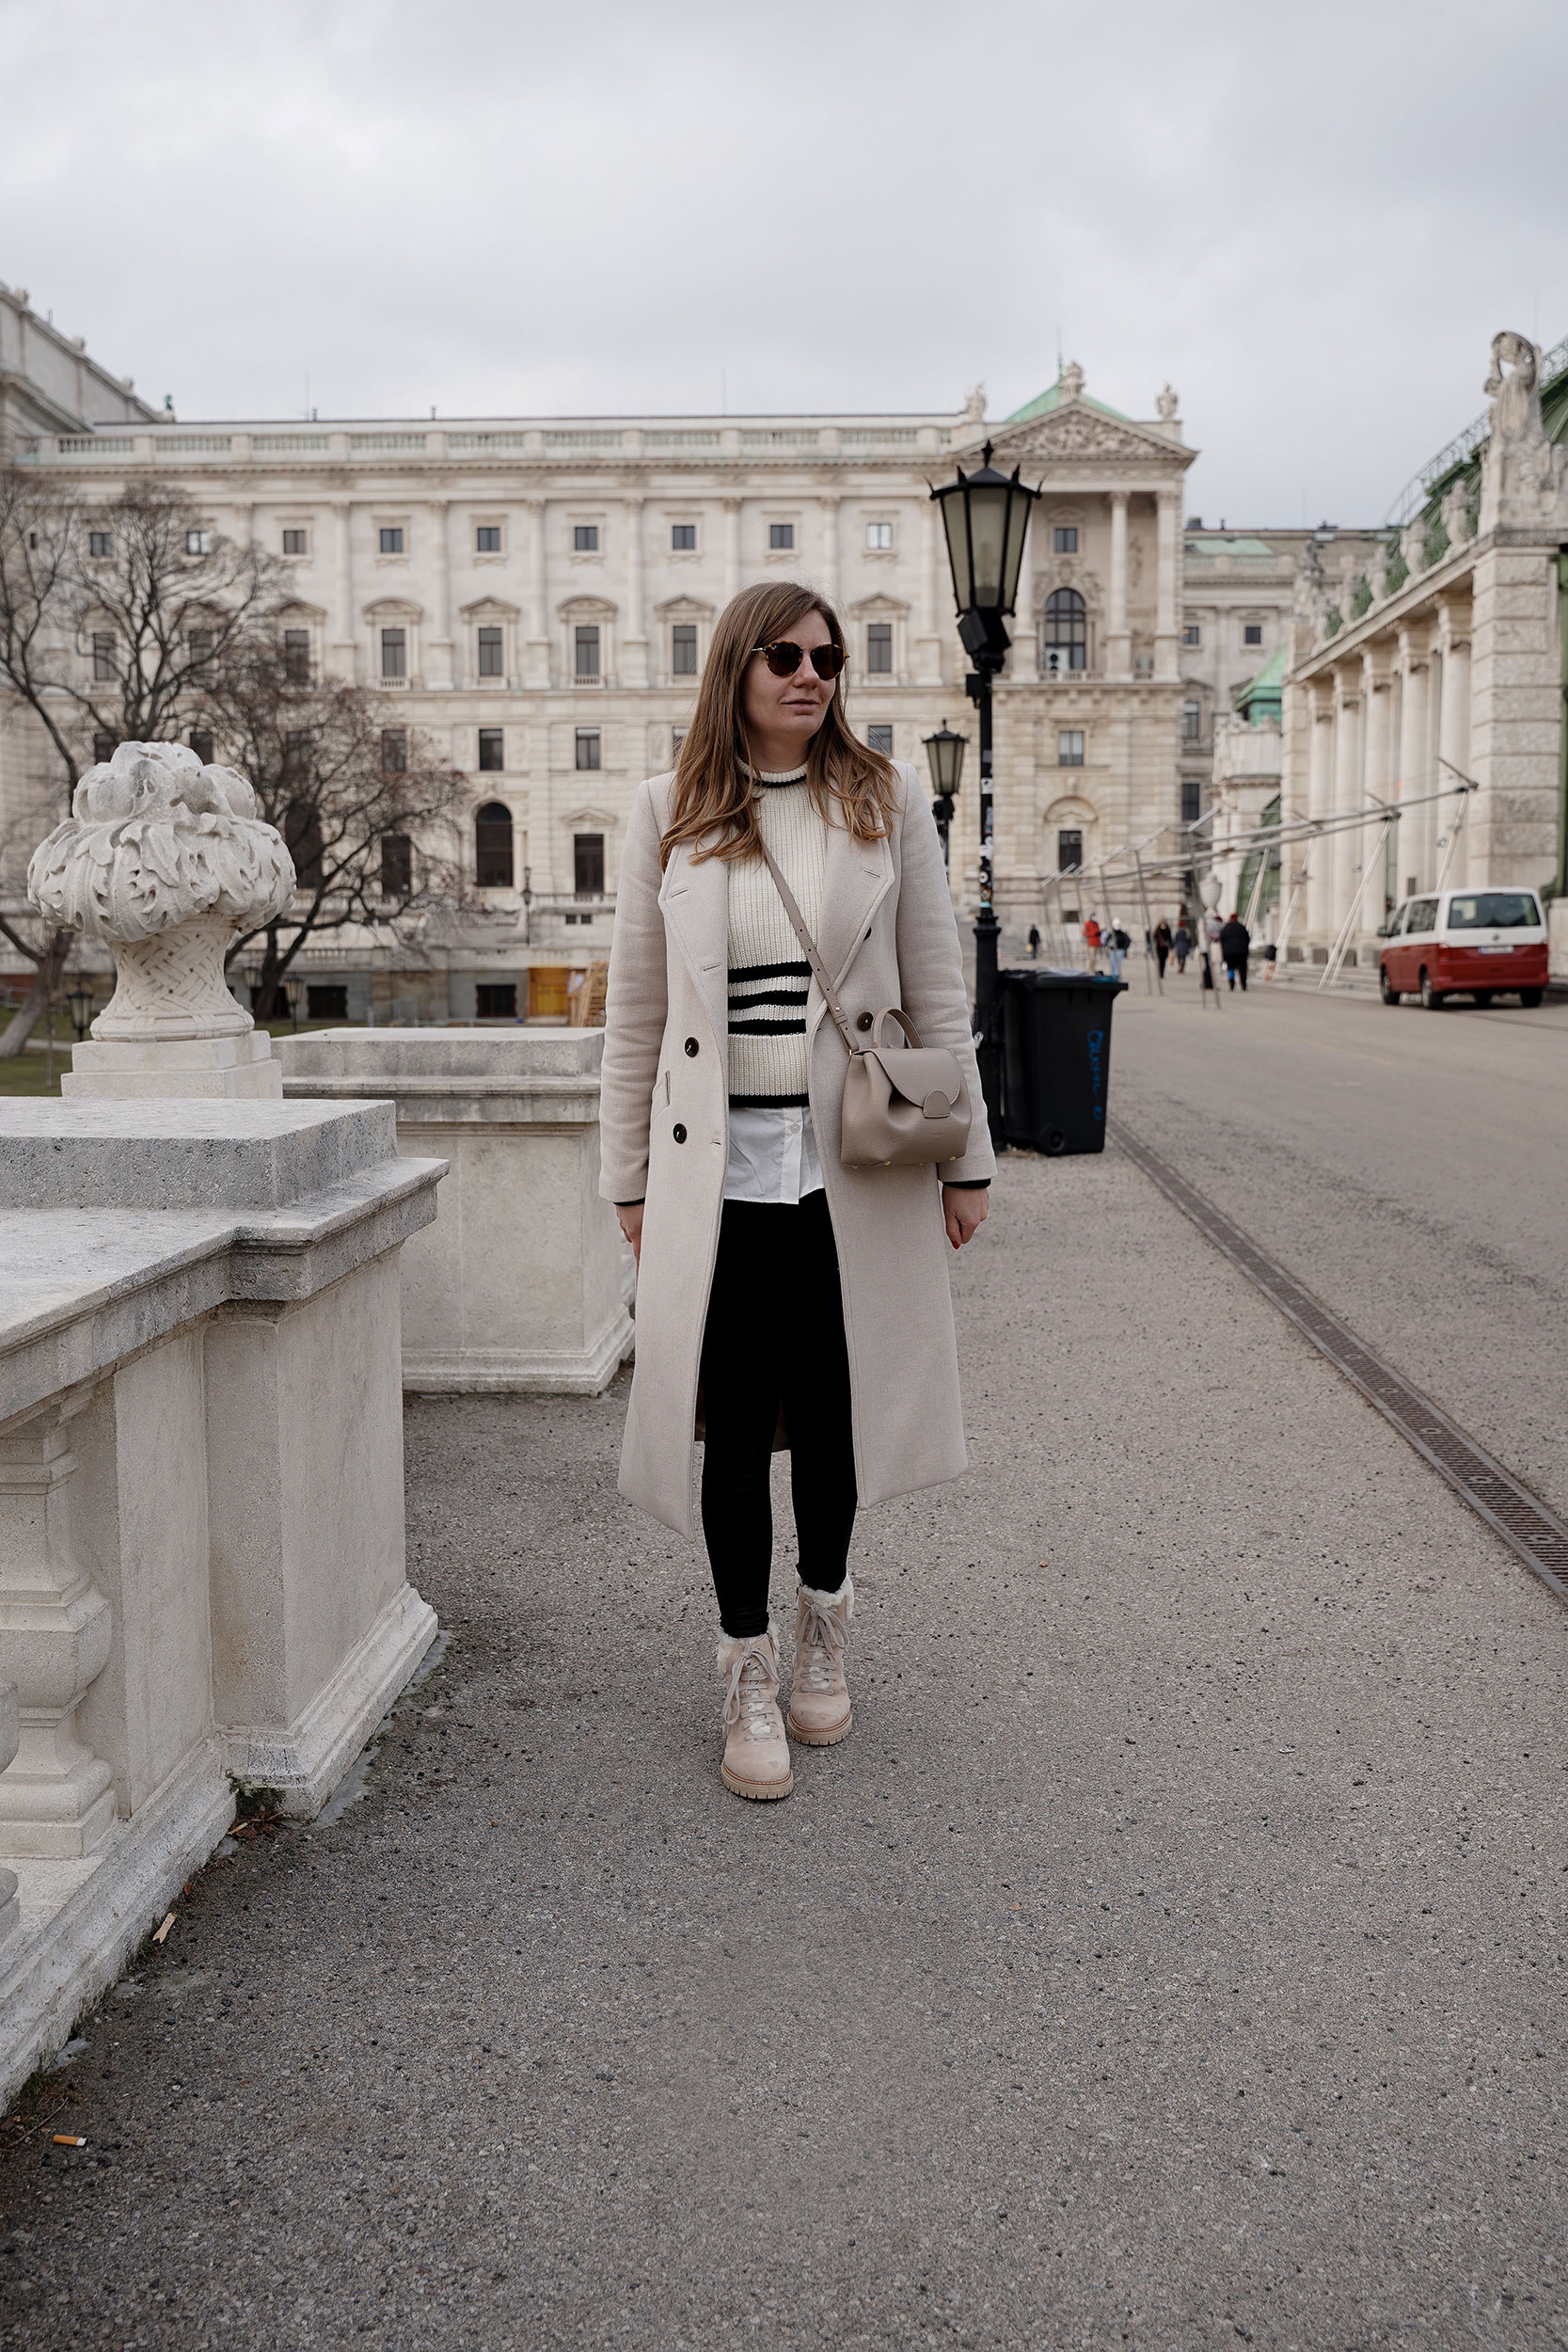 Winter Outfit Vienna Streetstyle, Sweater, winter coat, striped sweater, boots, polene bag